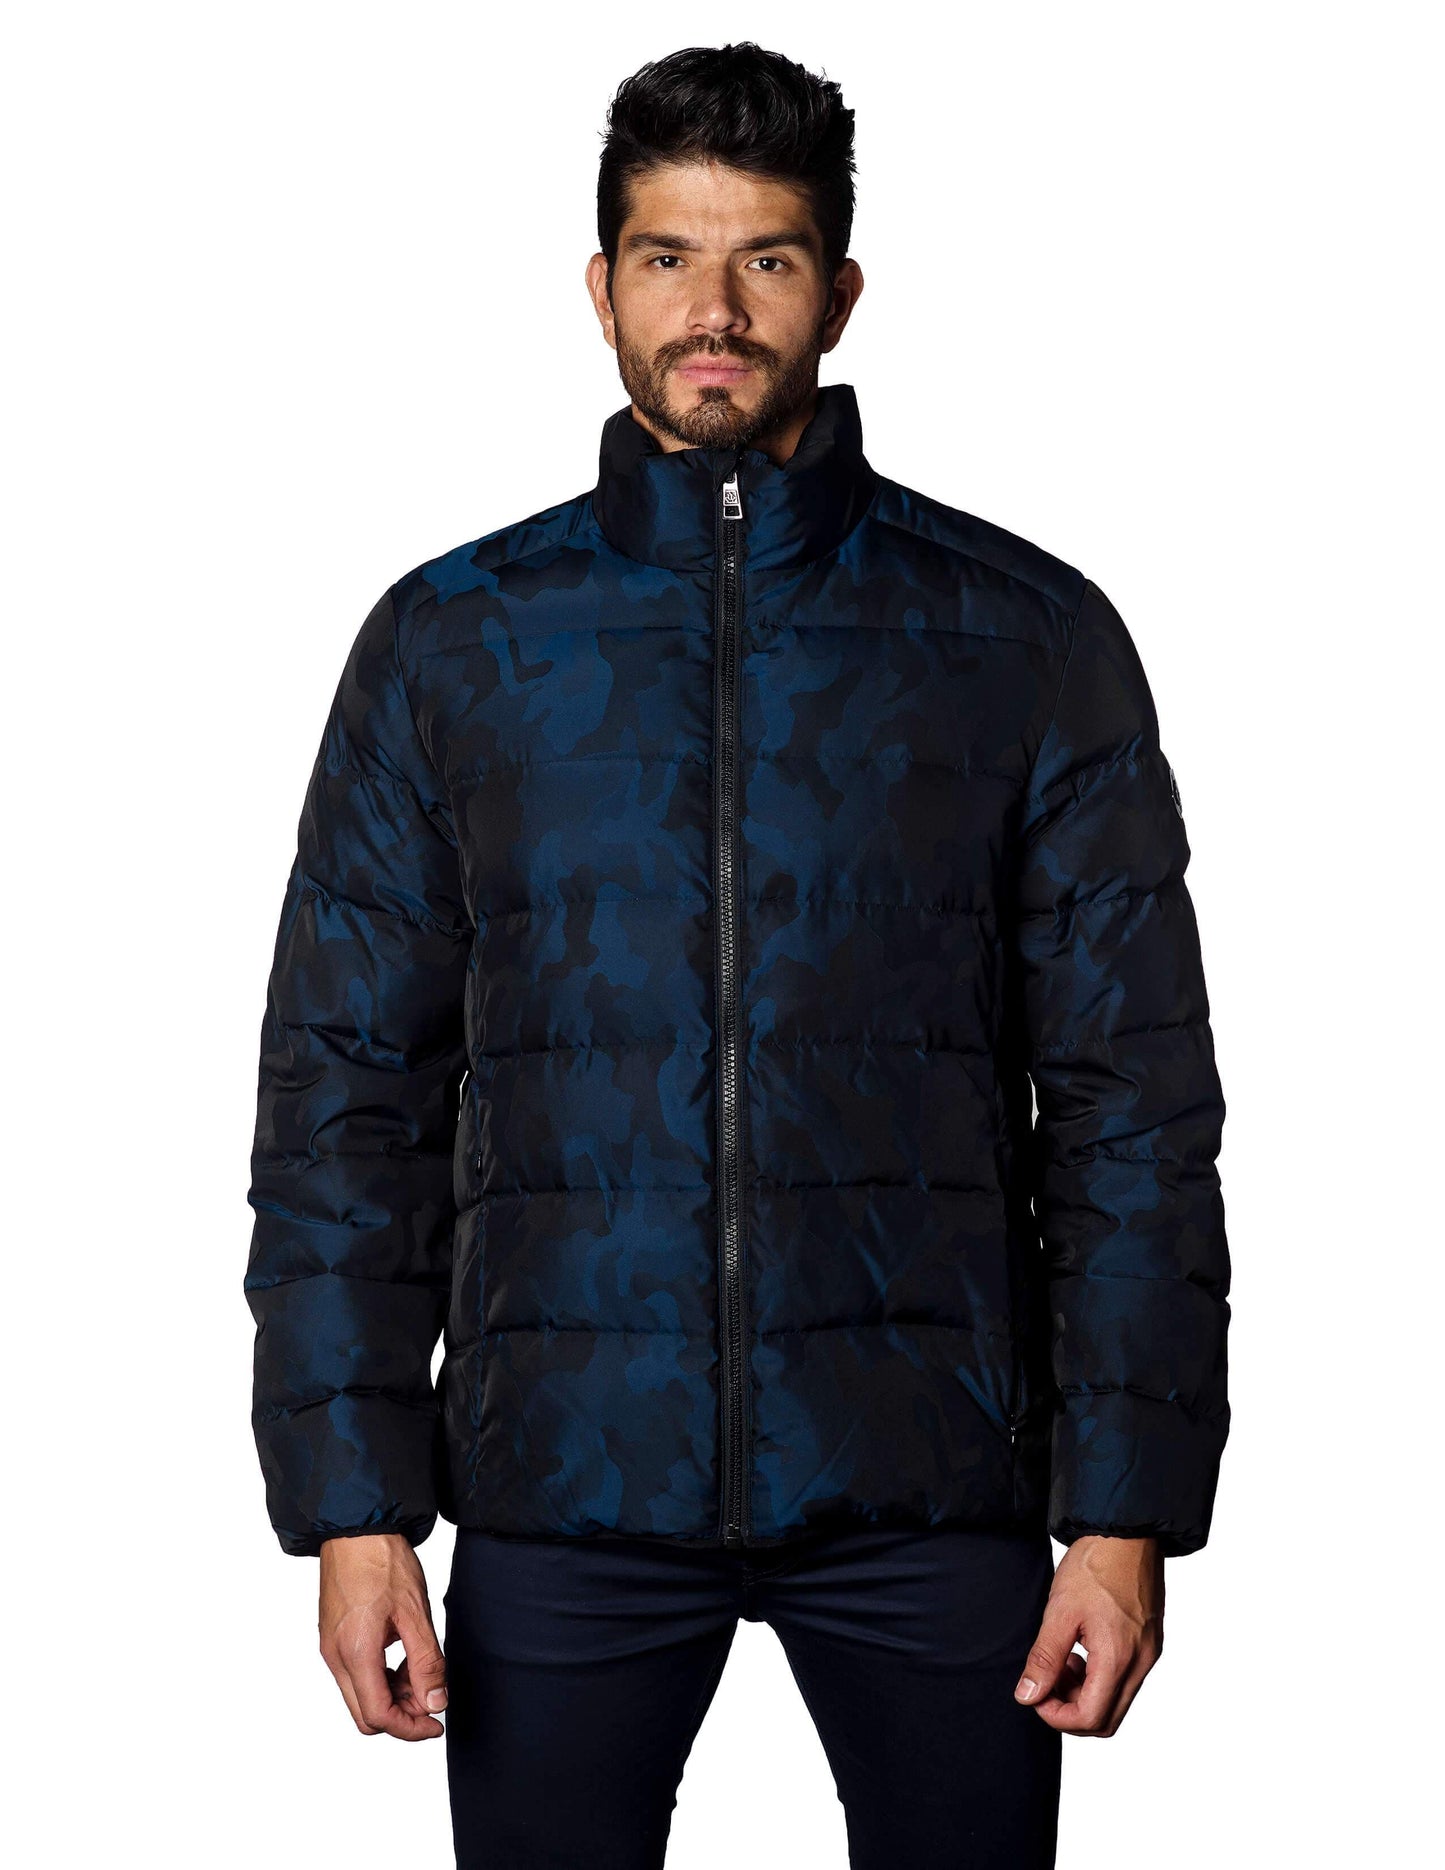 Navy Camouflage Jacquard Quilted Down Jacket Geneva 2C - Front Unzipped - Jared Lang